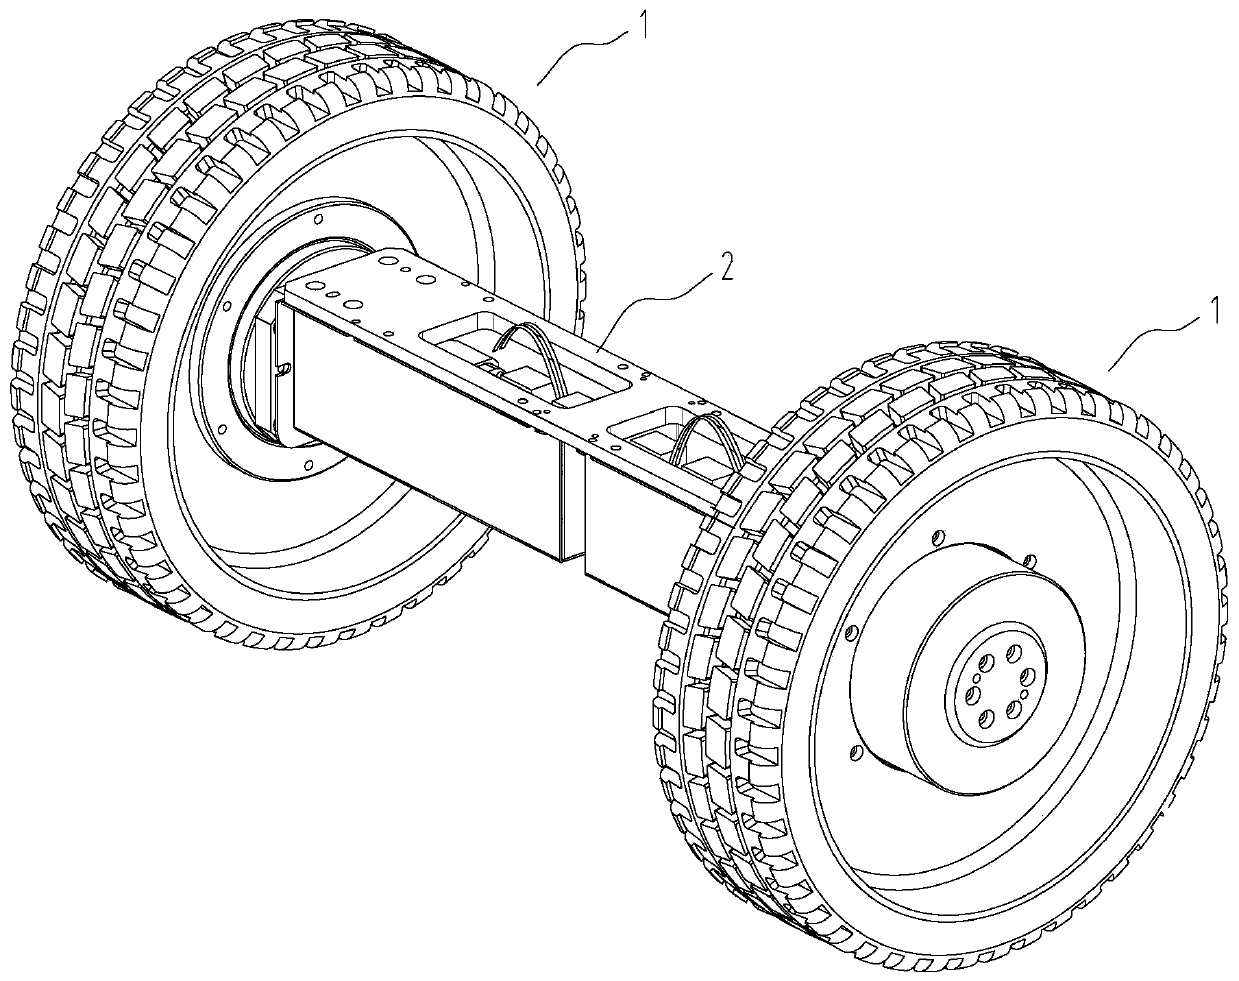 Two-wheel drive differential wheel driving unit structure